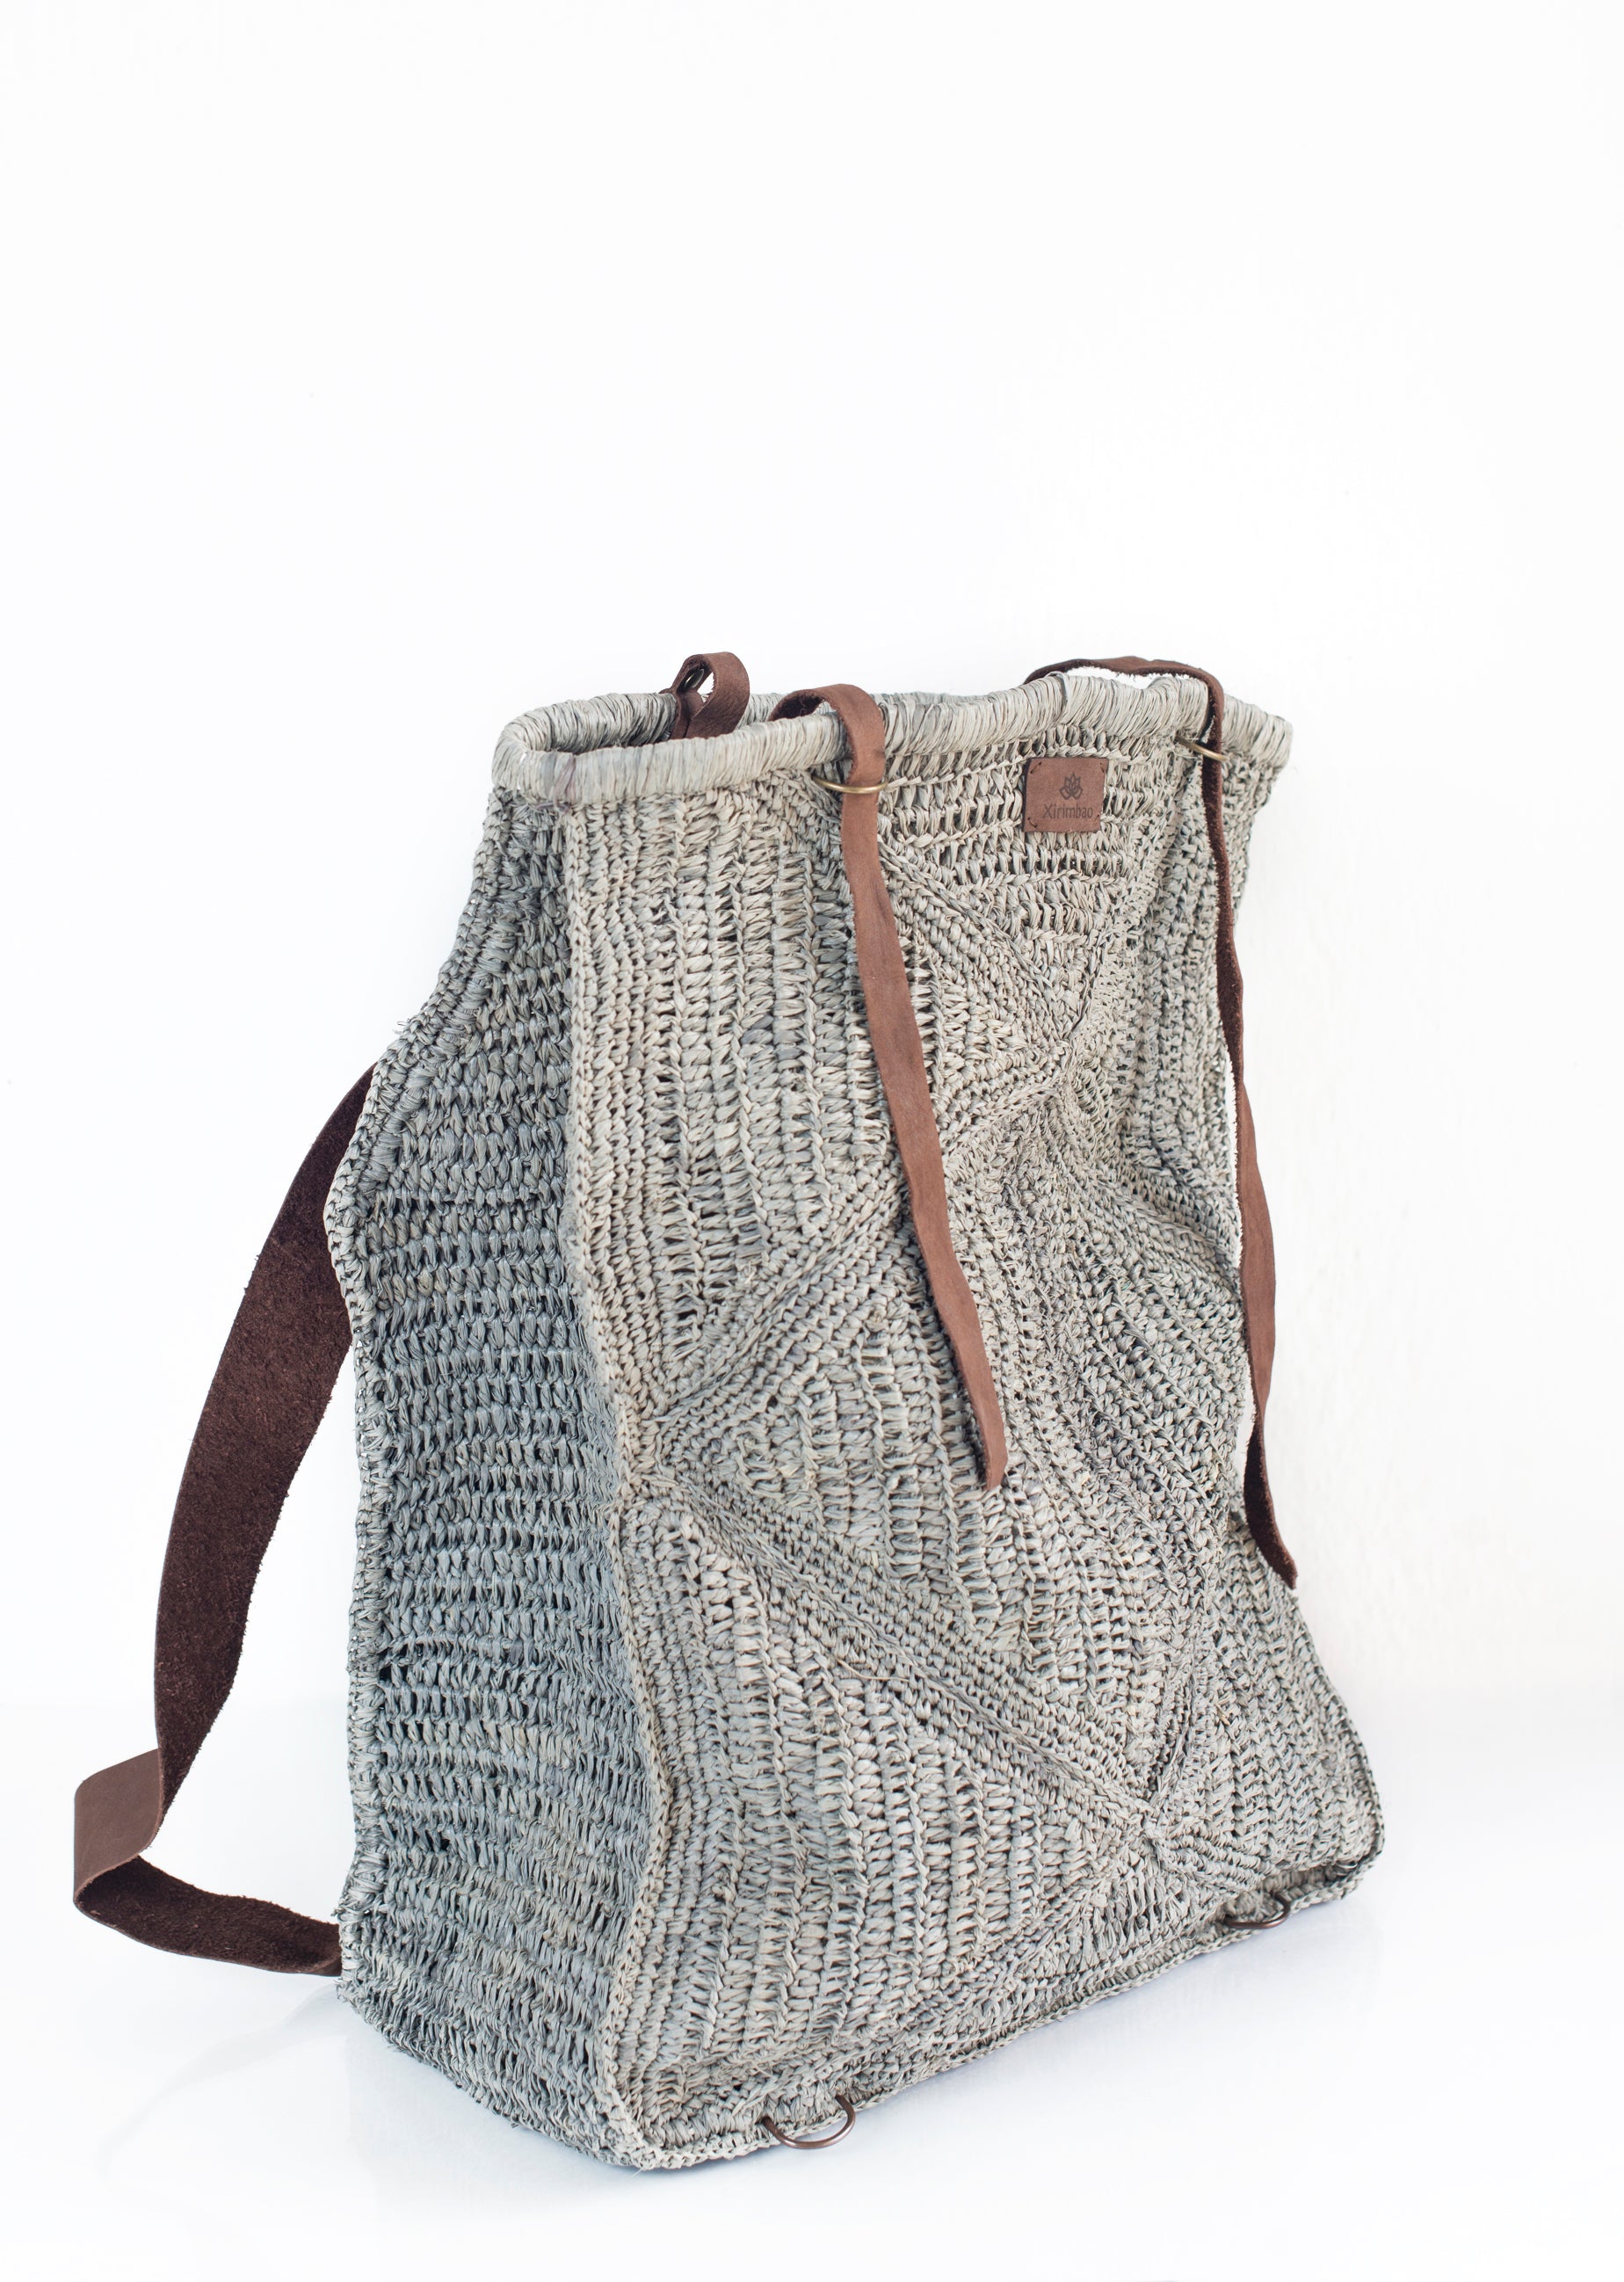 Diamond backpack with eco-leather handles